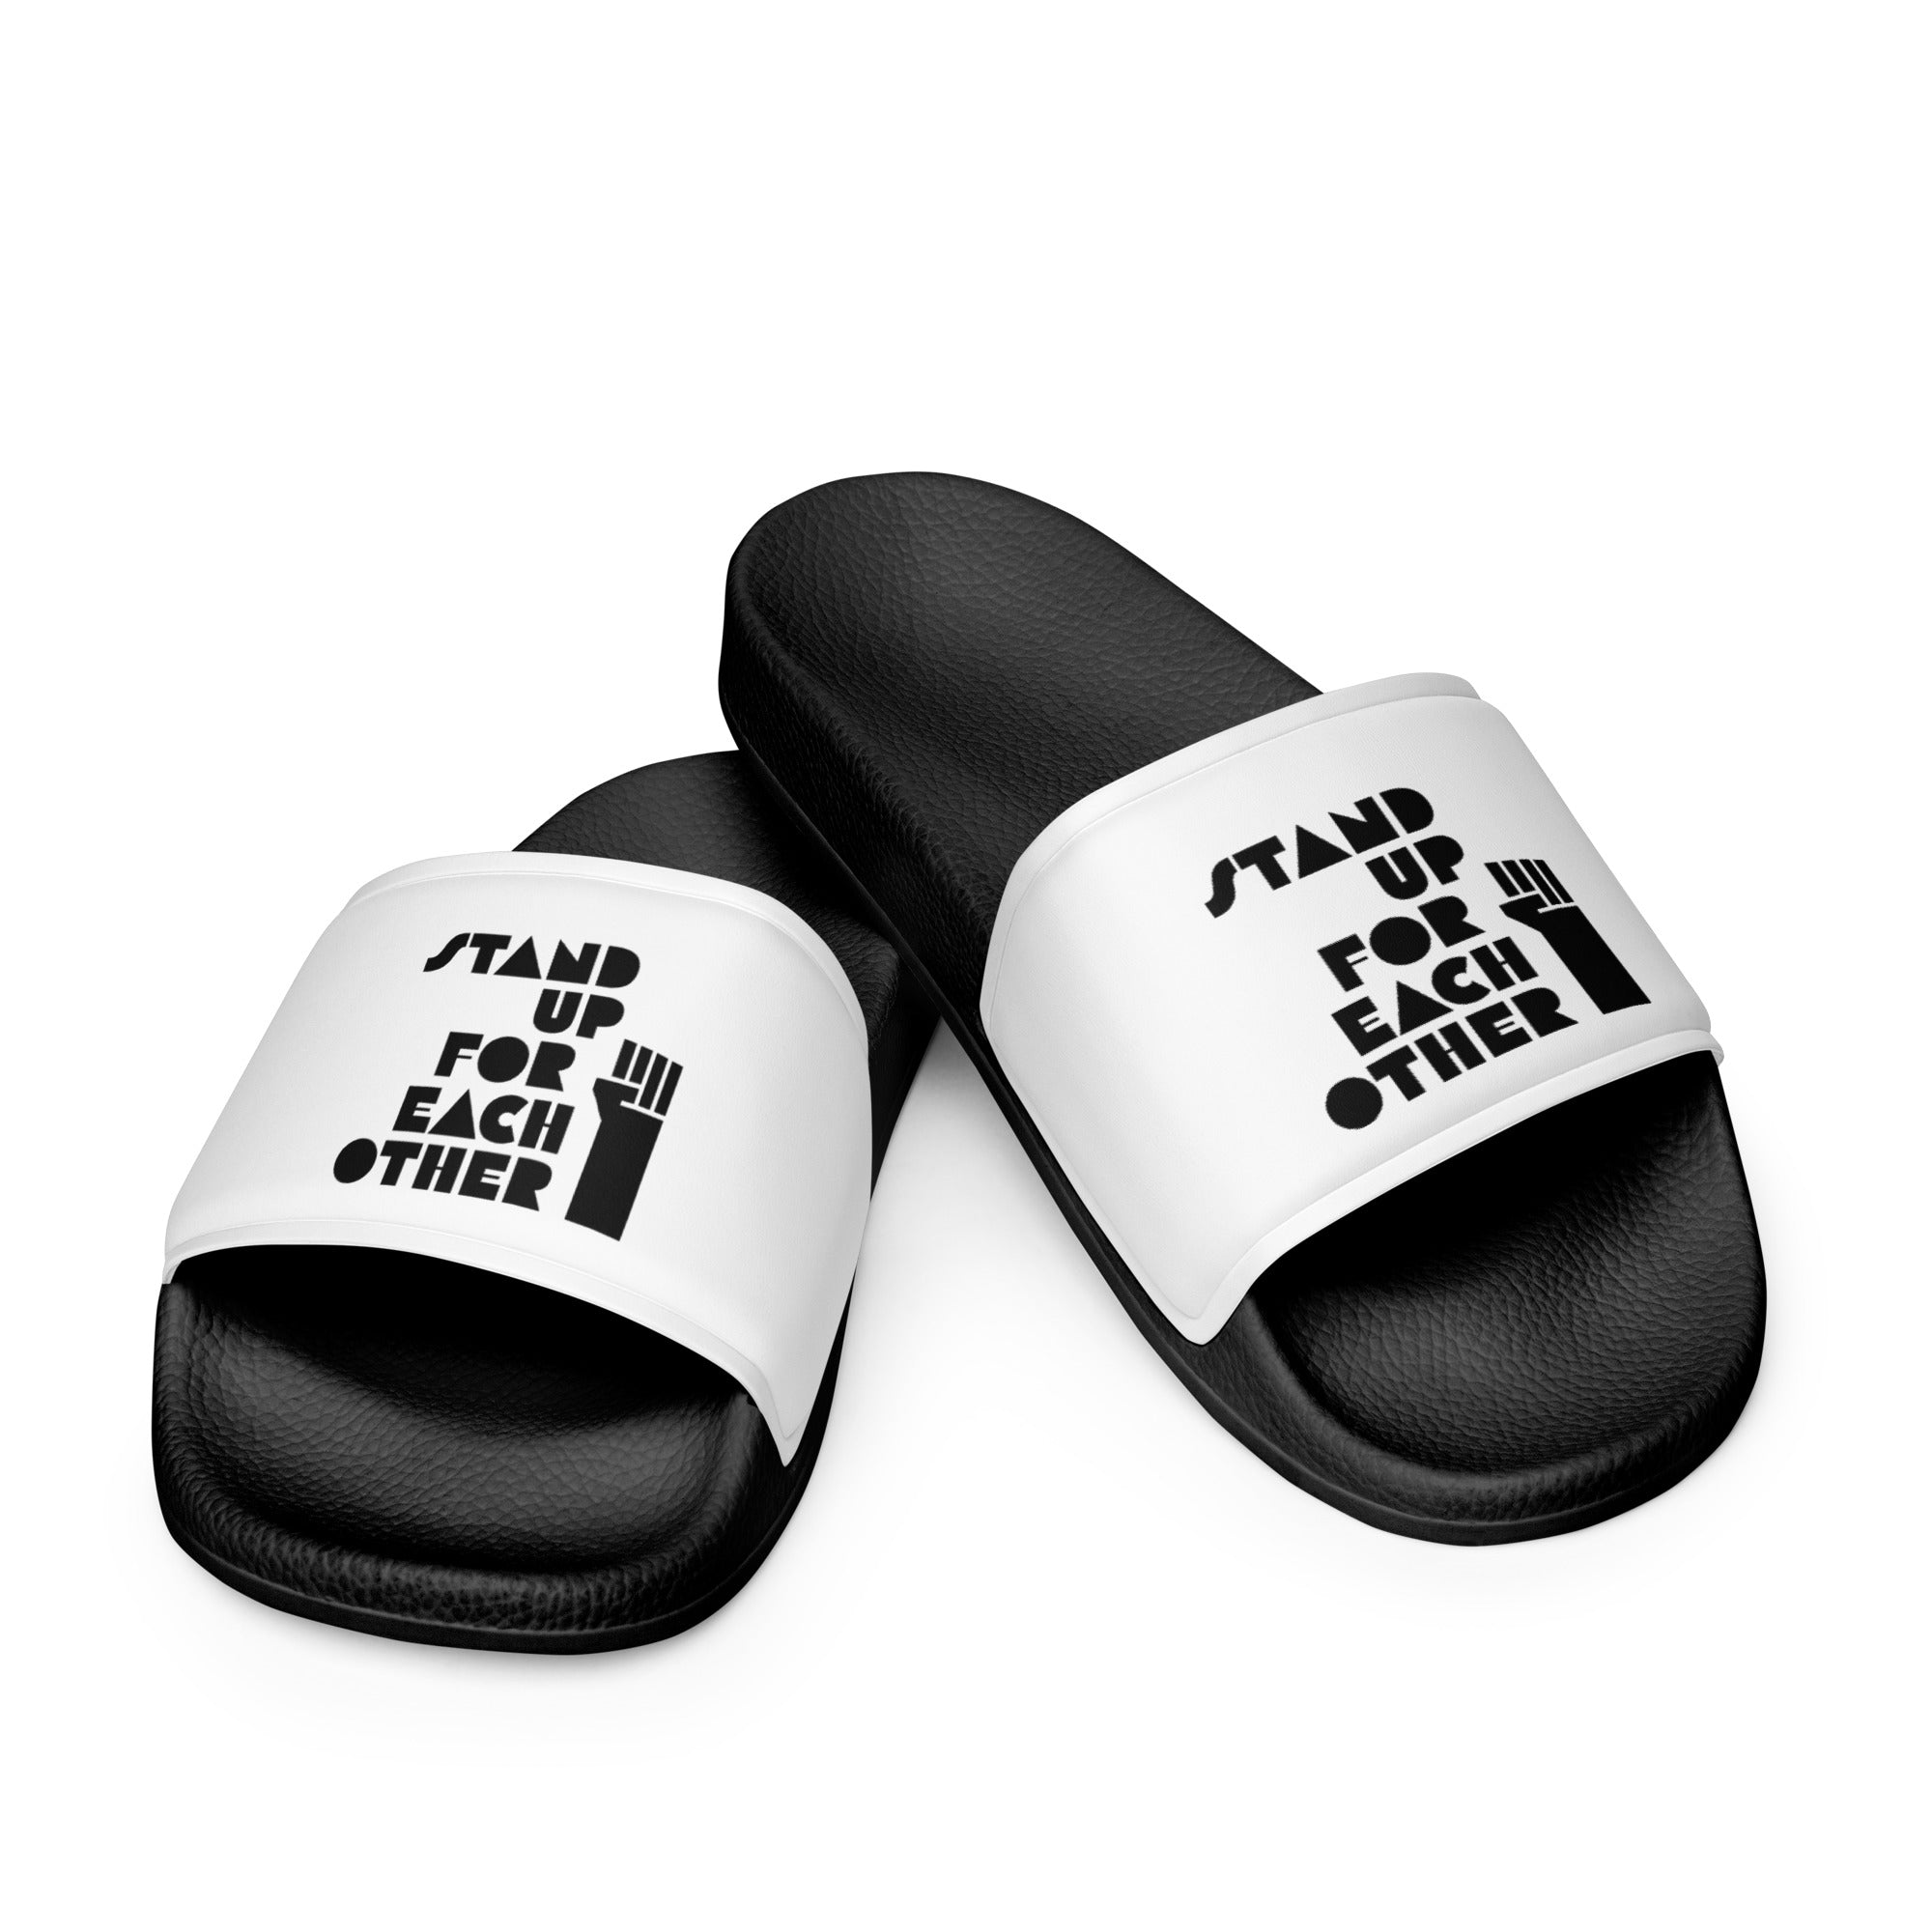 Stand Up For Each Other Men’s Slides